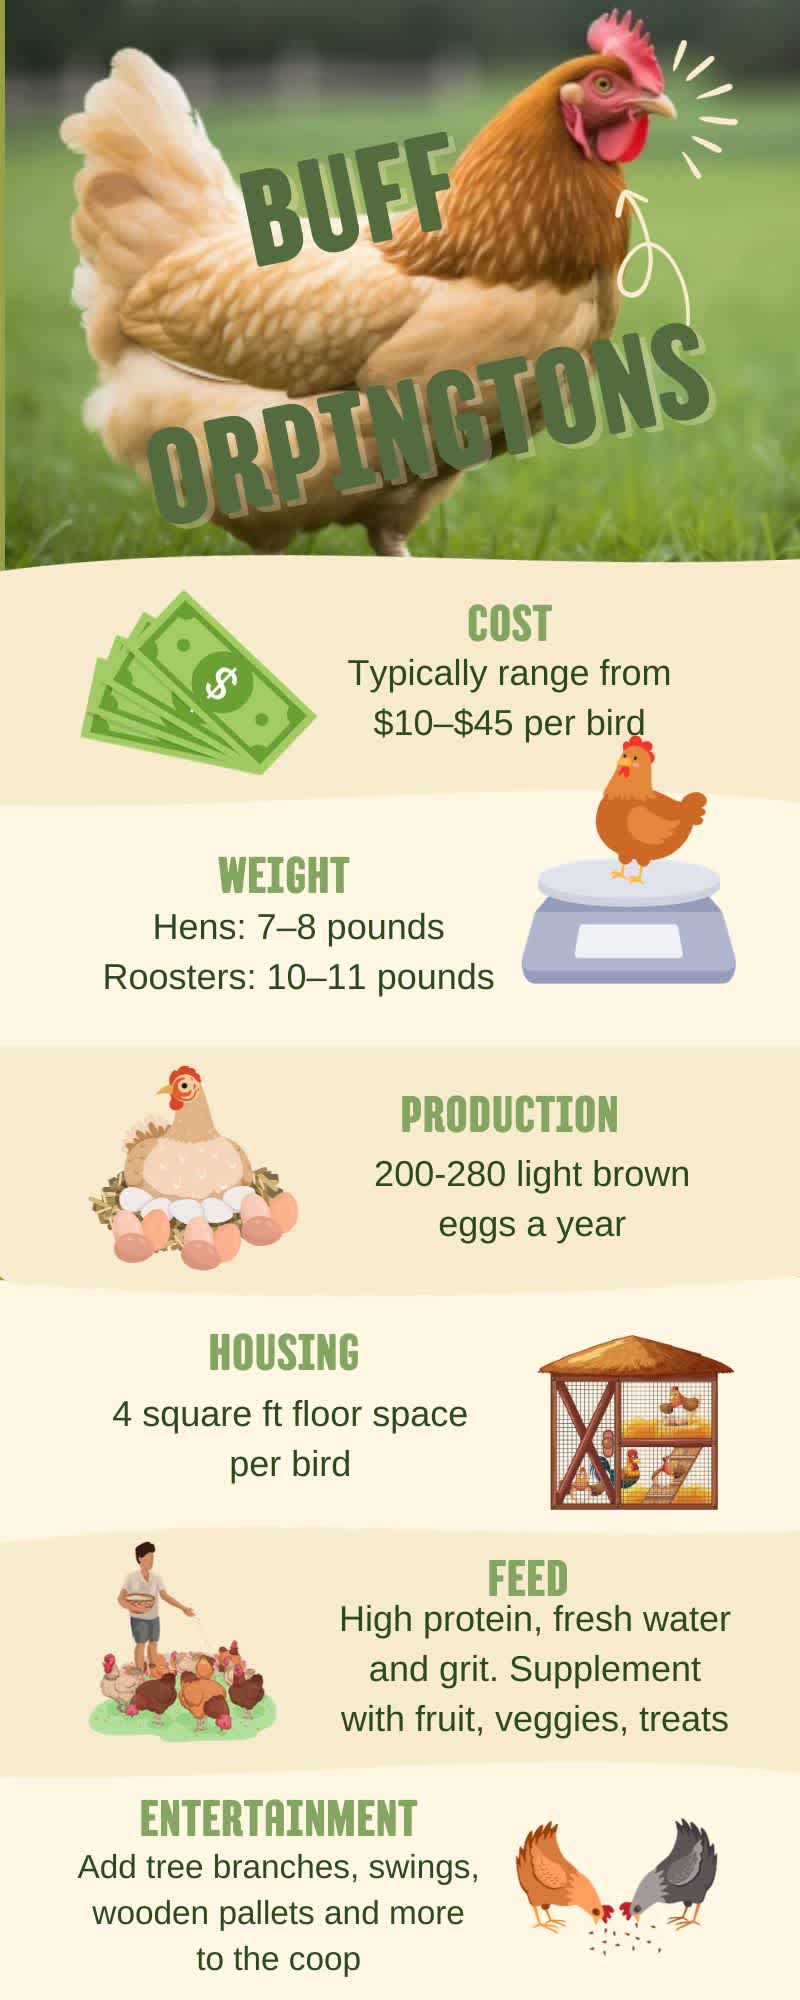 An infographic that explains how to care for buff orpington chickens